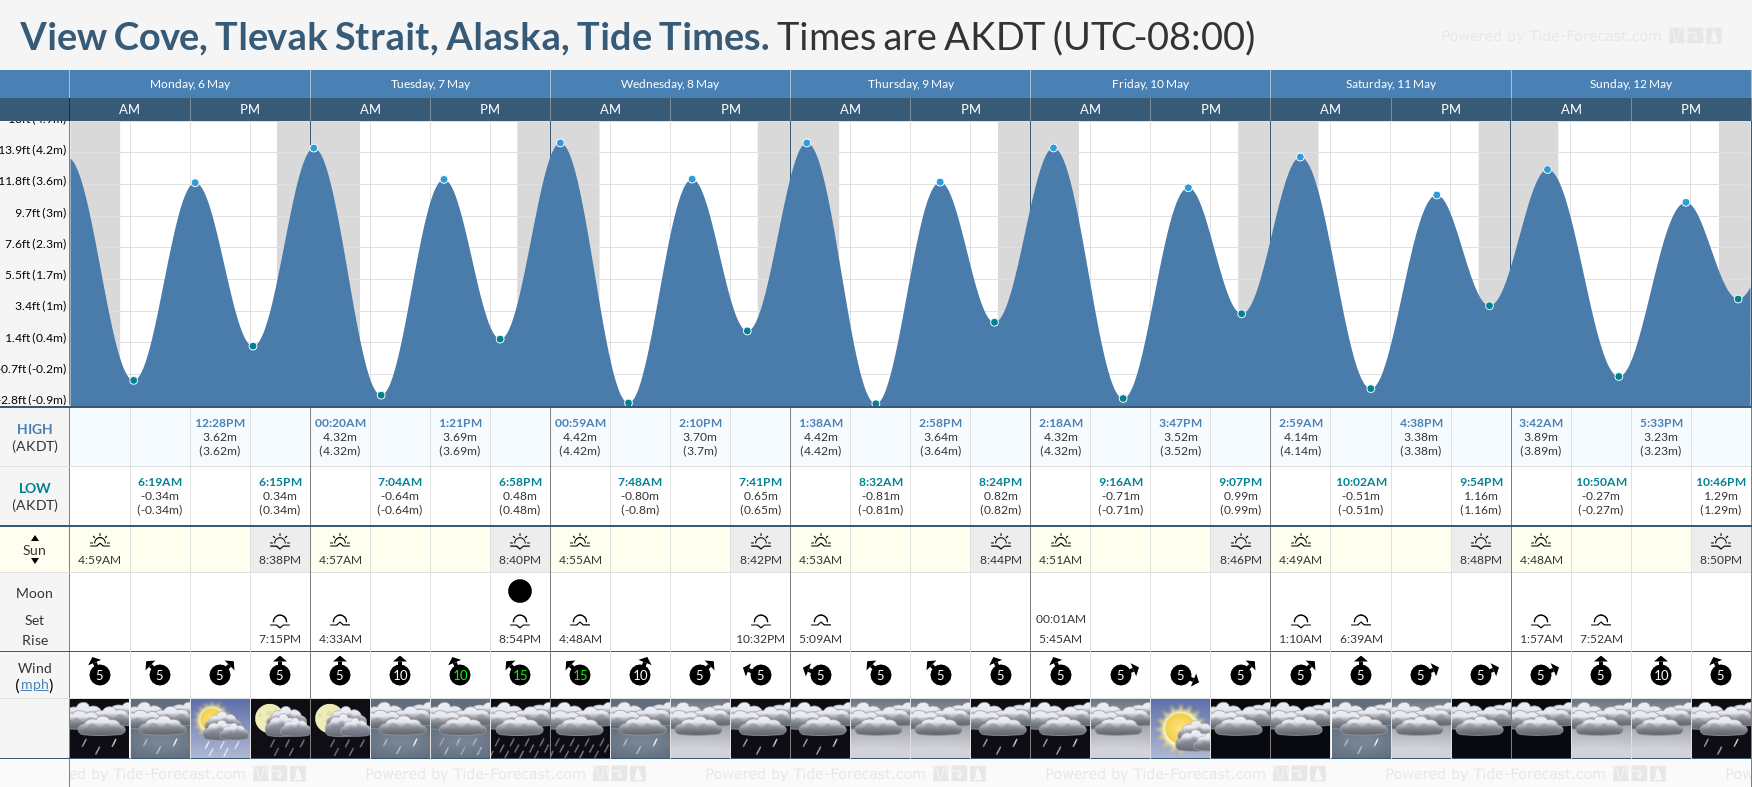 View Cove, Tlevak Strait, Alaska Tide Chart including high and low tide tide times for the next 7 days